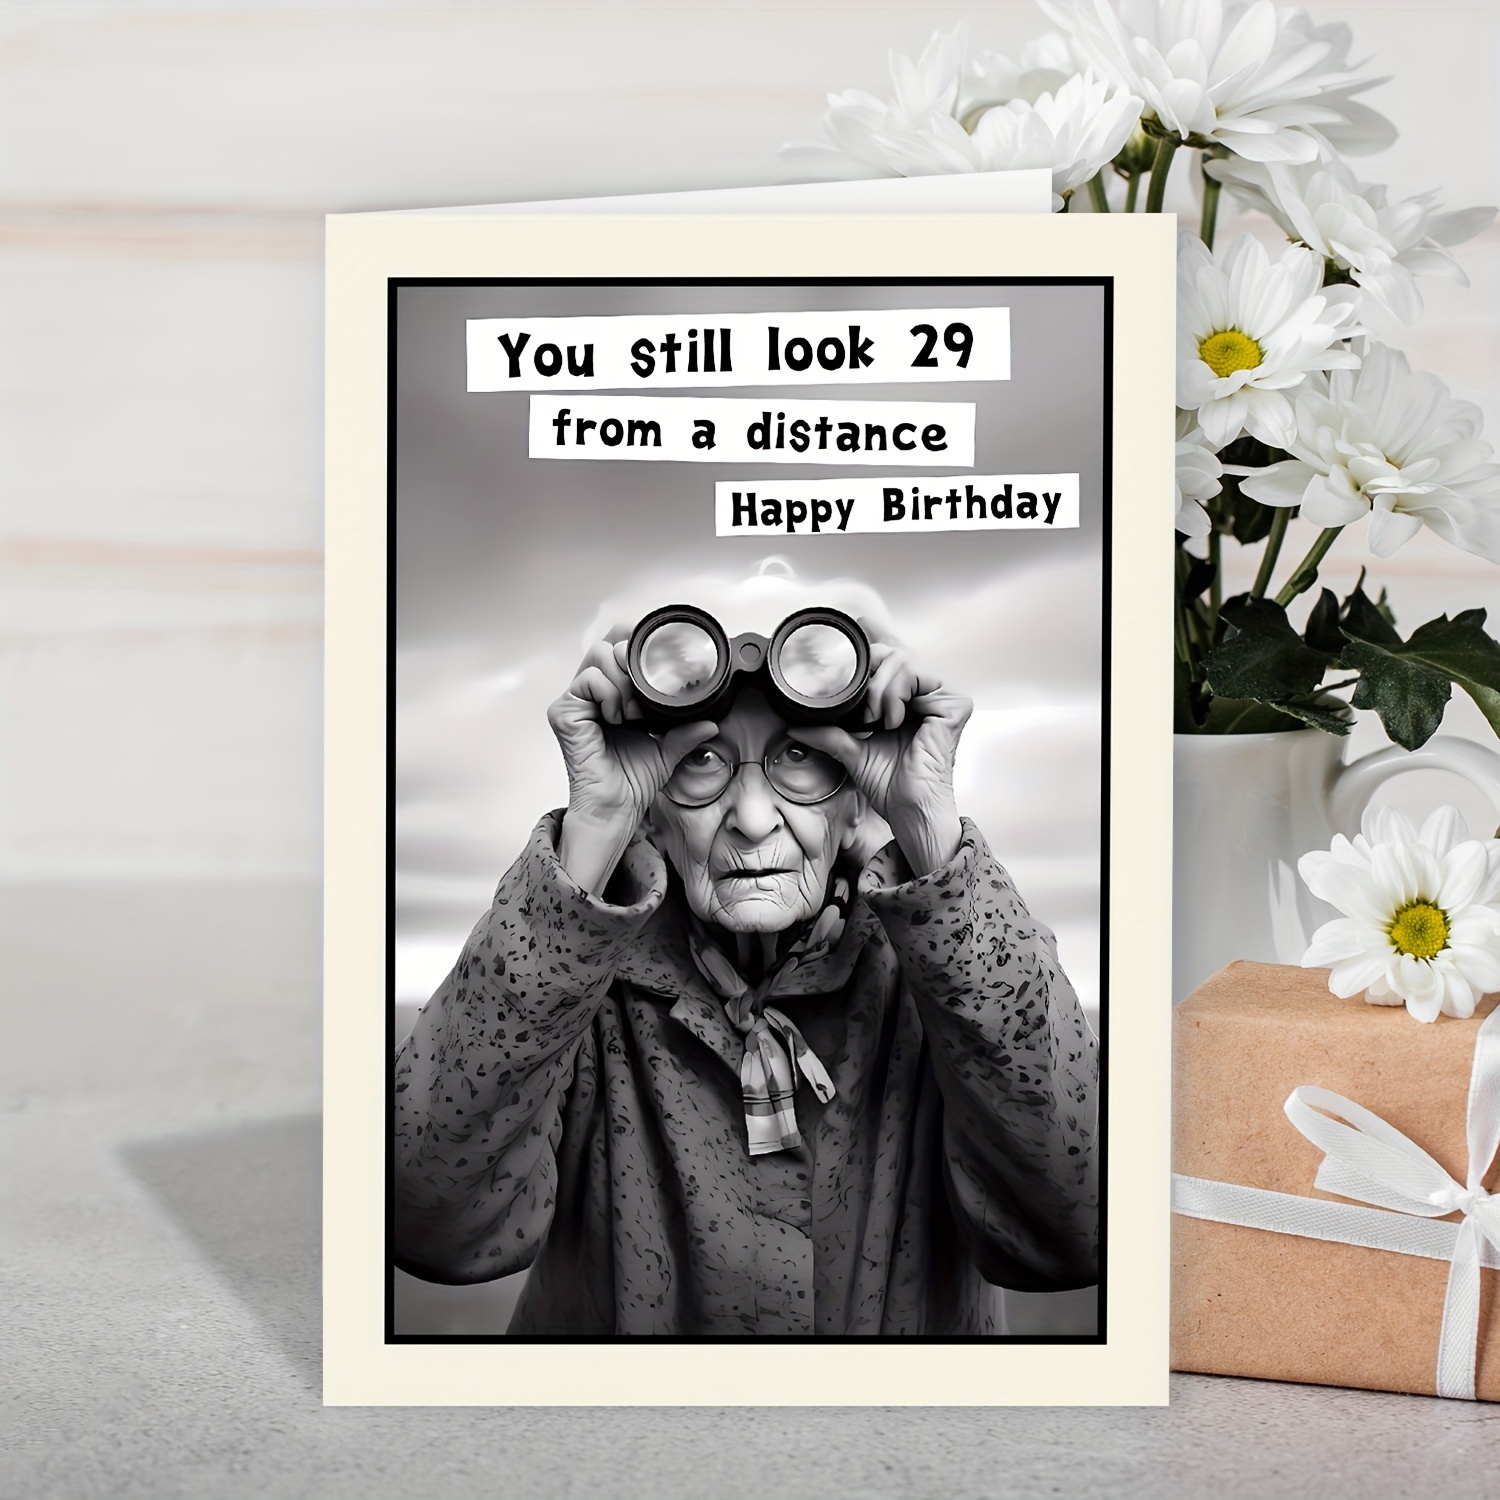 

1pc, Funny Birthday Cards For Men Women - Great For 30th, 40th, 50th, 60th, 70th, 75th, 80th, 90th Birthday Gifts For Women Men Her Him Dad Mom Husband Wife Friend - Includes Card & Envelope